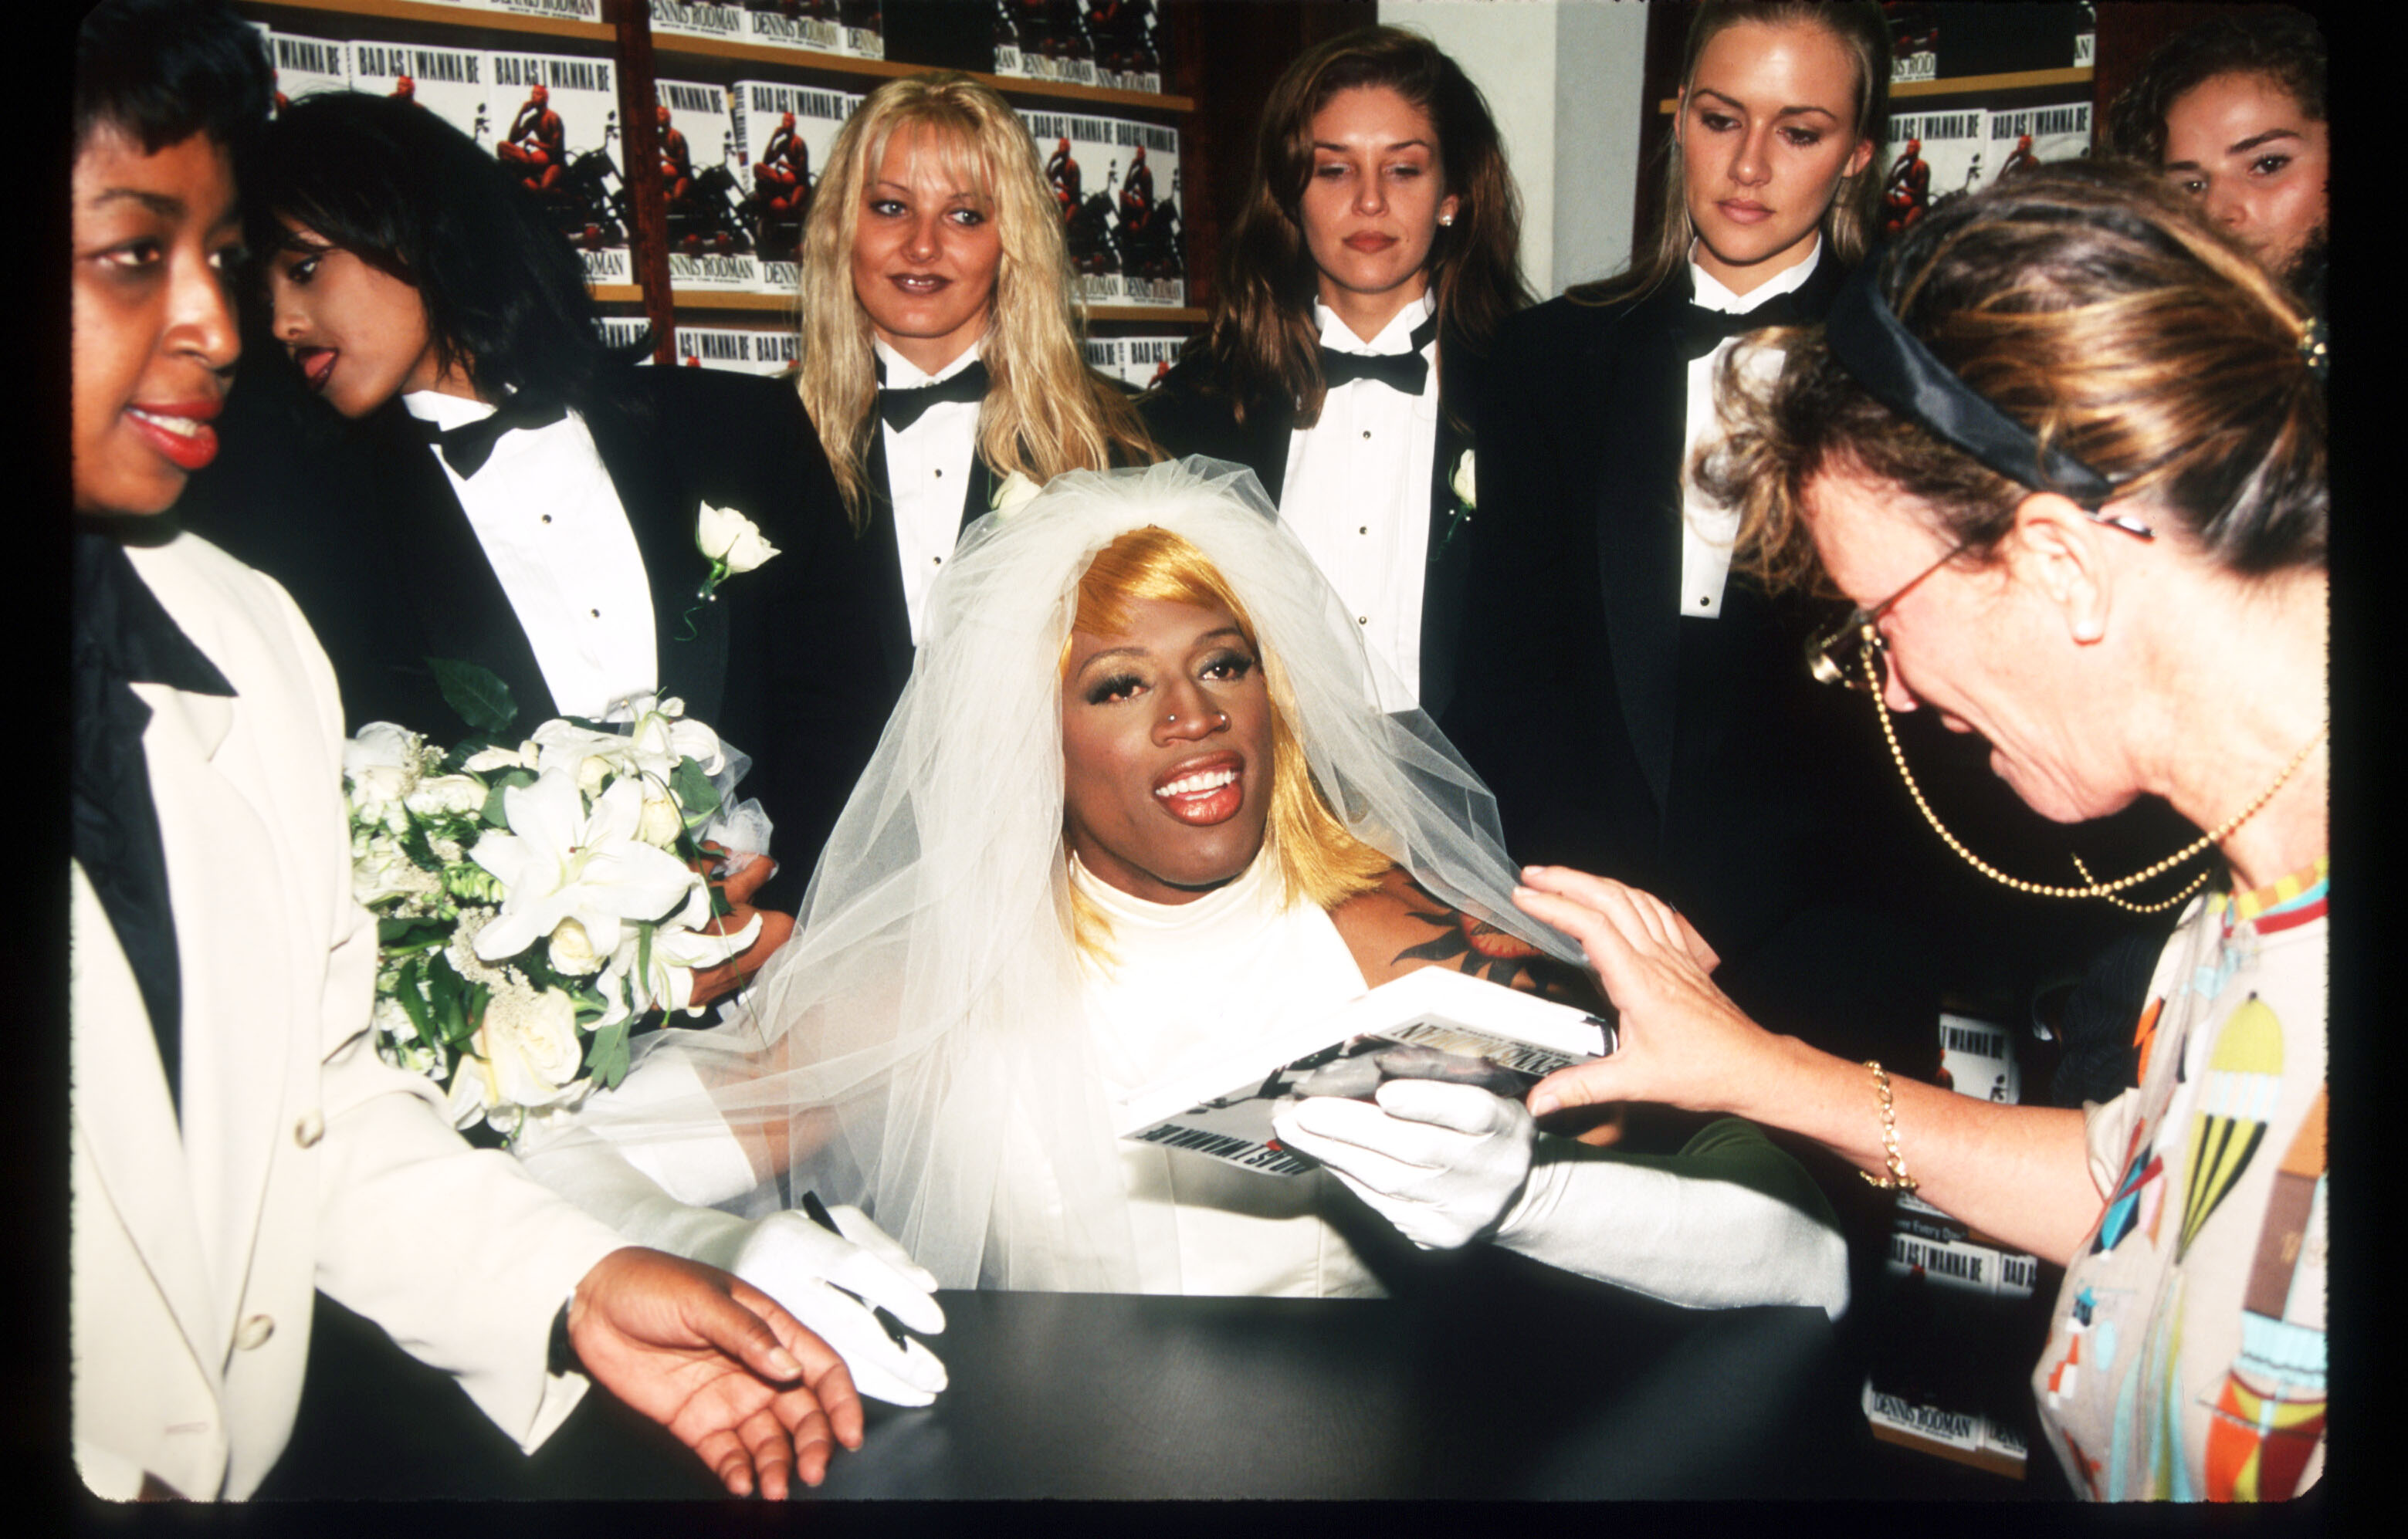 Dennis Rodman signs his autobiography August 21, 1996 in New York City. Rodman arrived in a horse-drawn carriage dressed in a wedding gown to launch his new book called "Bad as I Wanna Be." | Source: Getty Images